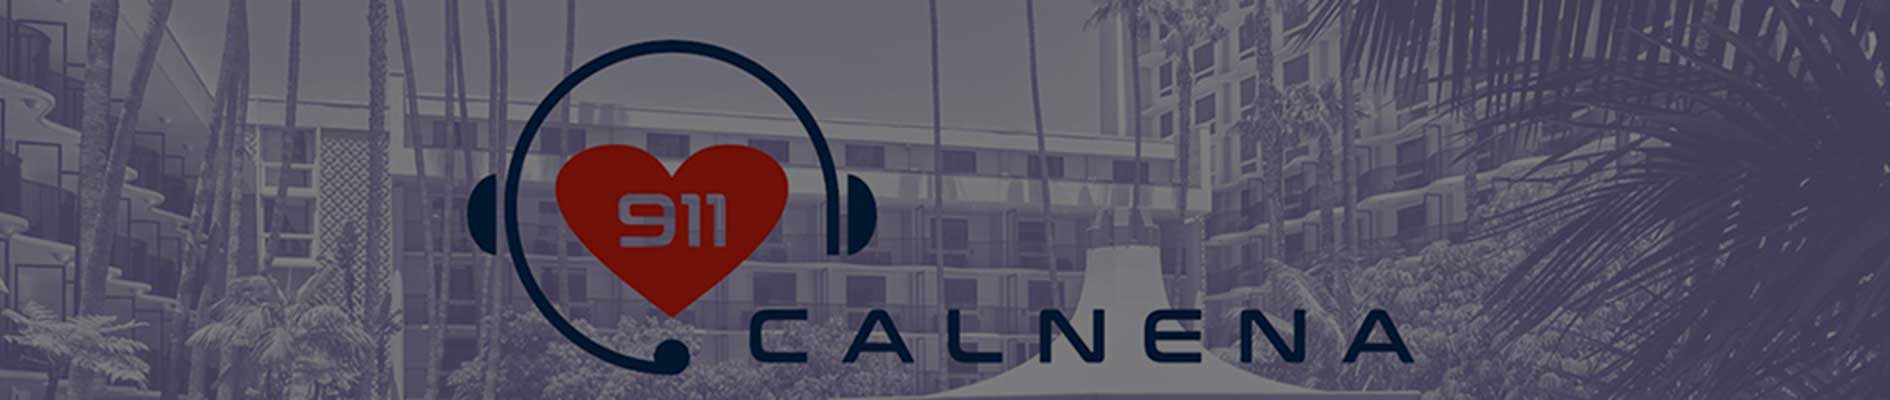 next-generation-9-1-1-event-calnena-2024-headset-with-911-heart-beneath-it-with-calnena-text-on-the-right-over-hotel-pool-background